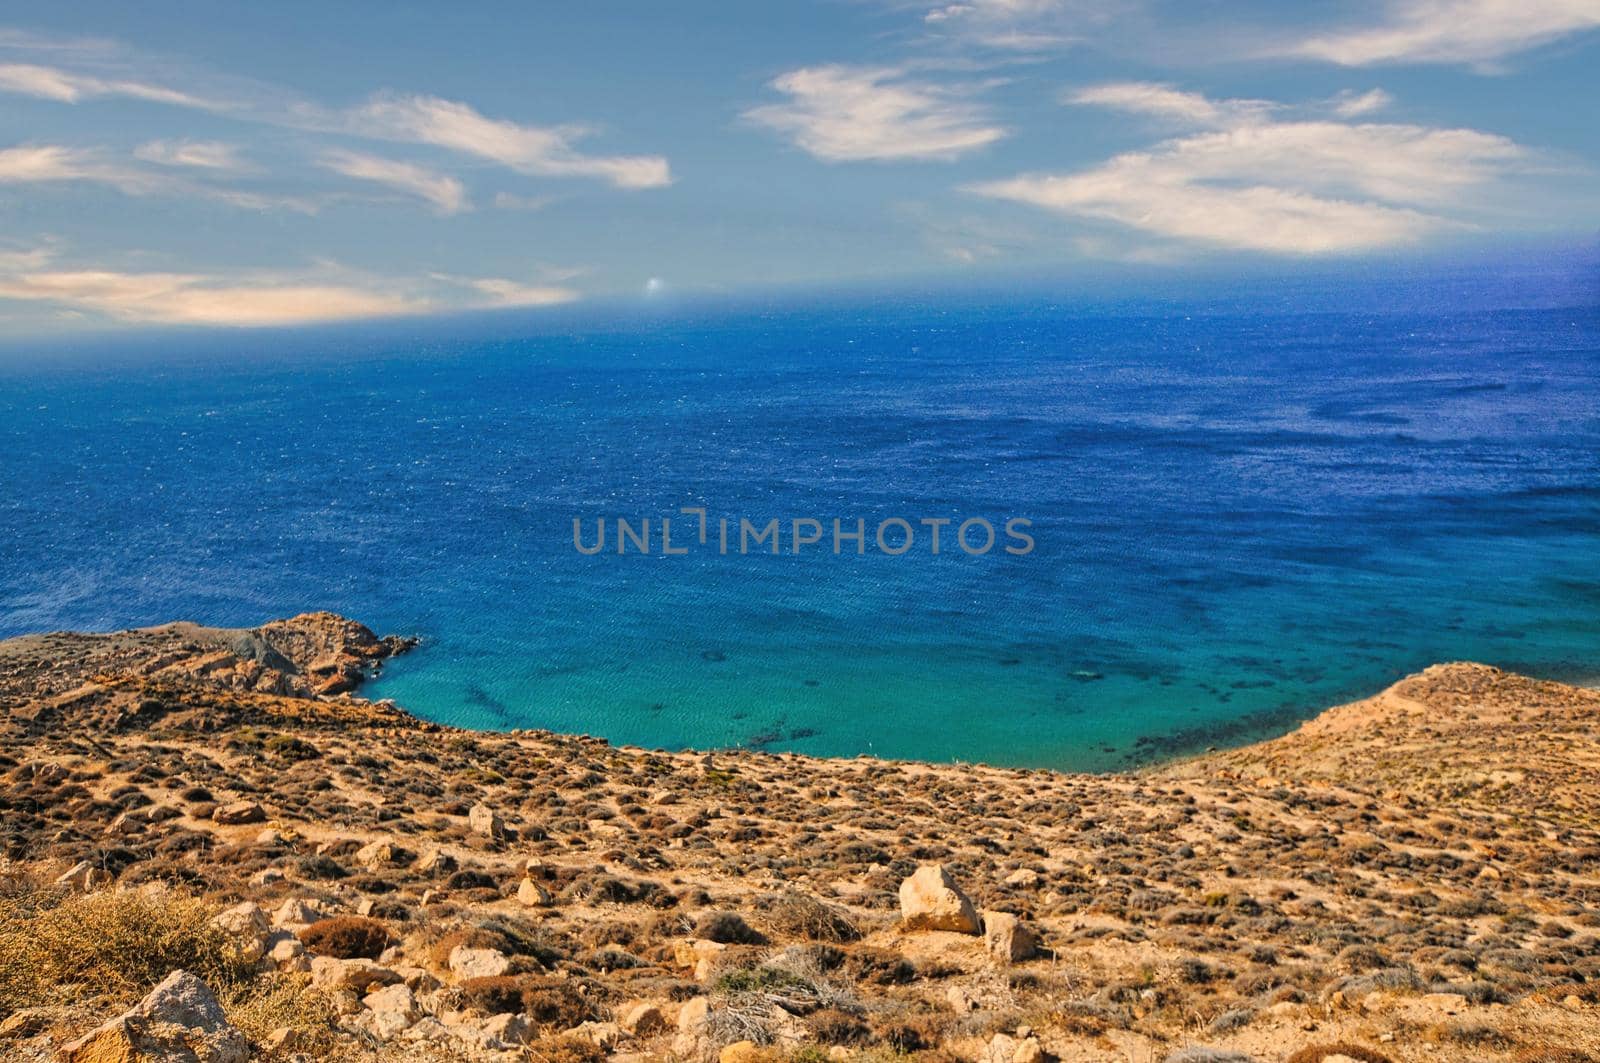 Cycladic island of Anafi, with beautiful beaches, pefrect for vacation